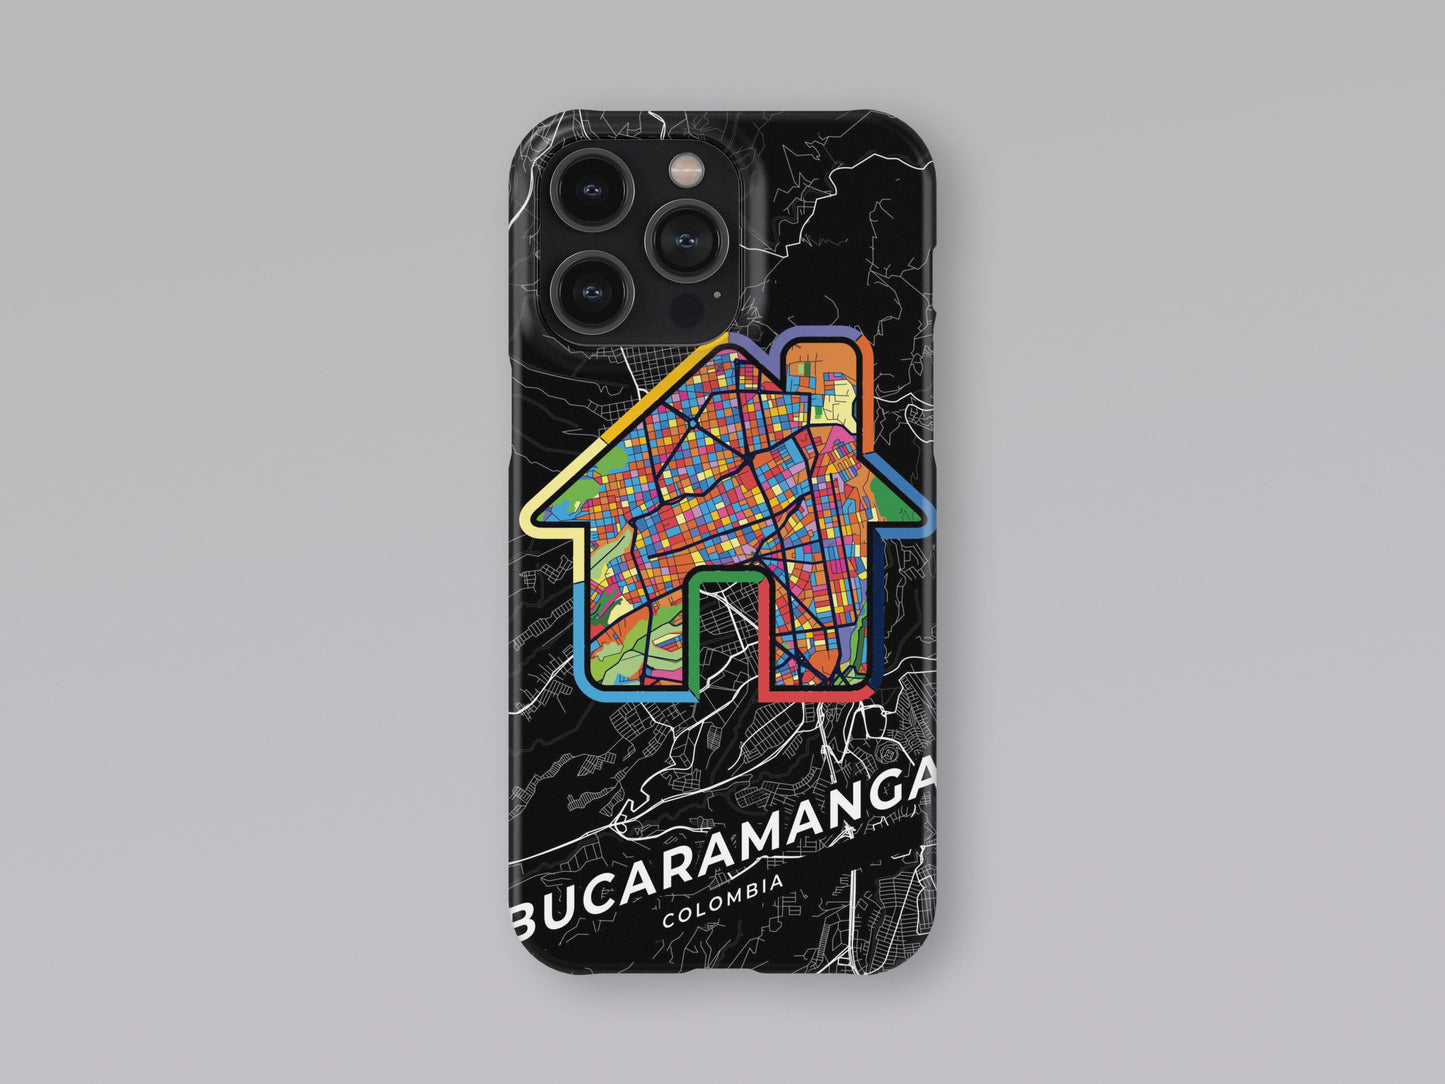 Bucaramanga Colombia slim phone case with colorful icon. Birthday, wedding or housewarming gift. Couple match cases. 3